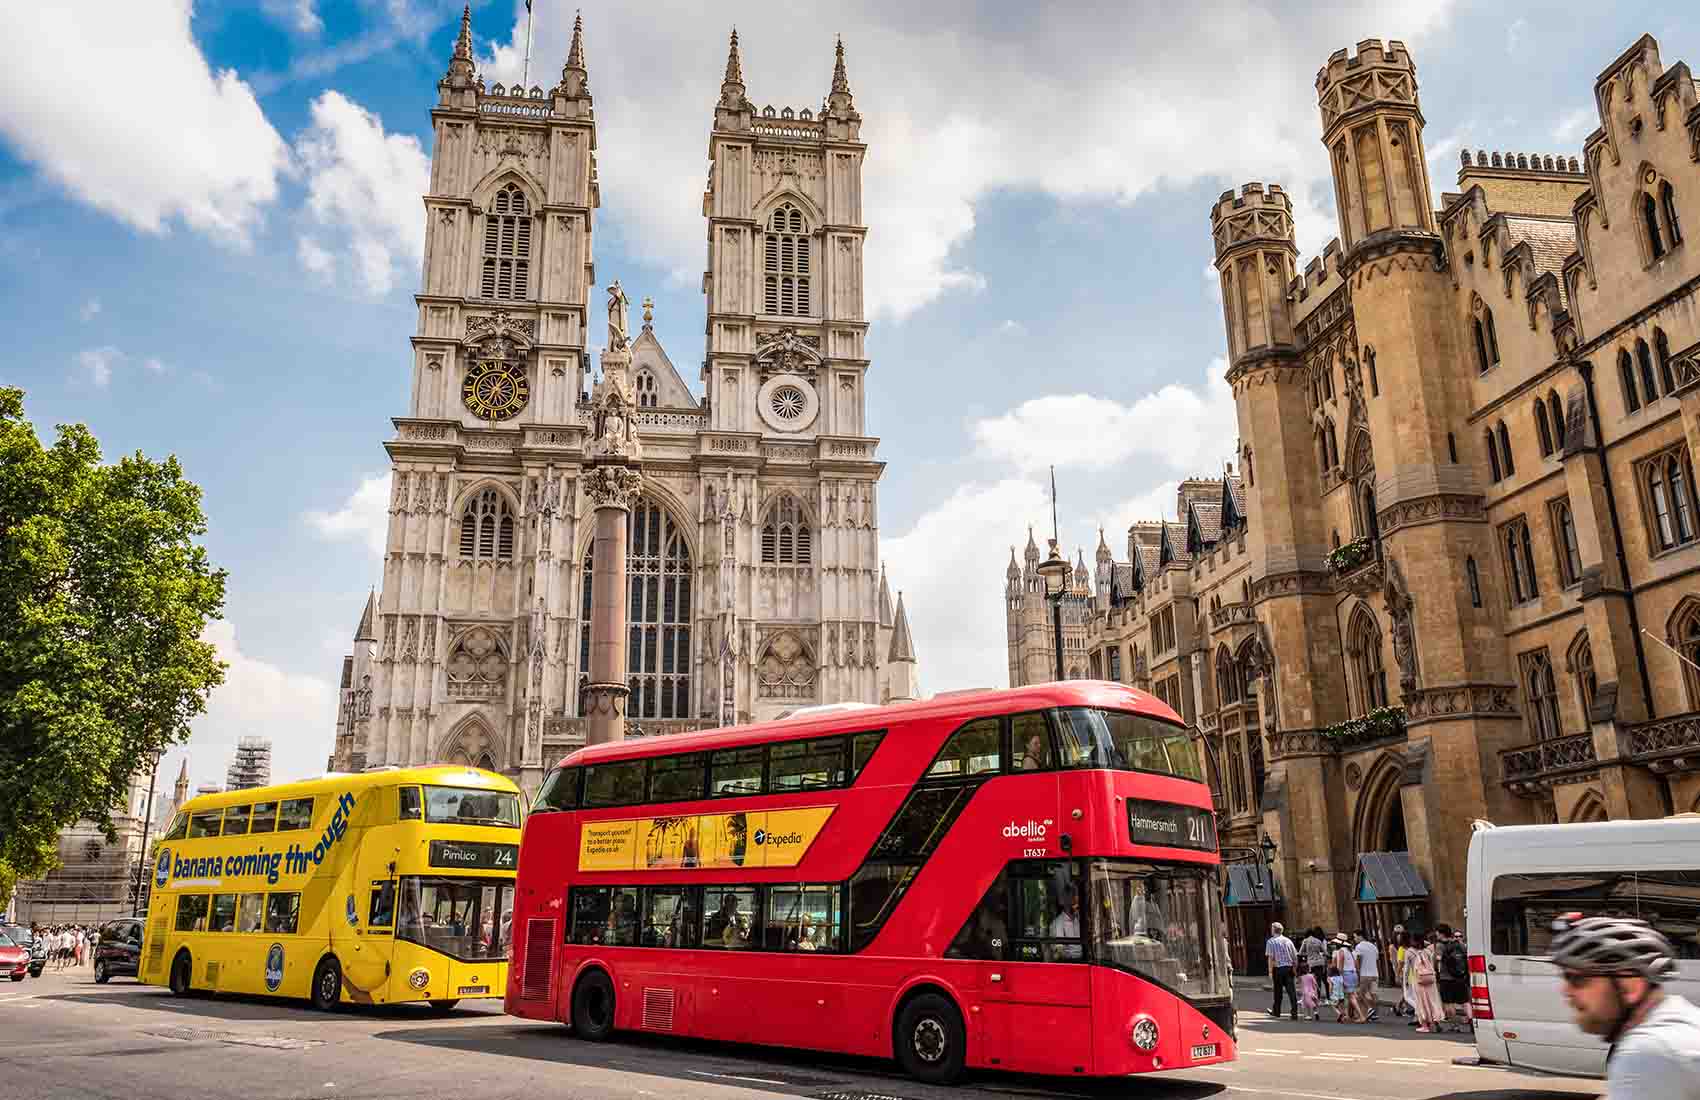 The Westminster Abbey In London is an experience you shouldn't miss if you are looking to learn about the royal history. Check out our guide including tickets.